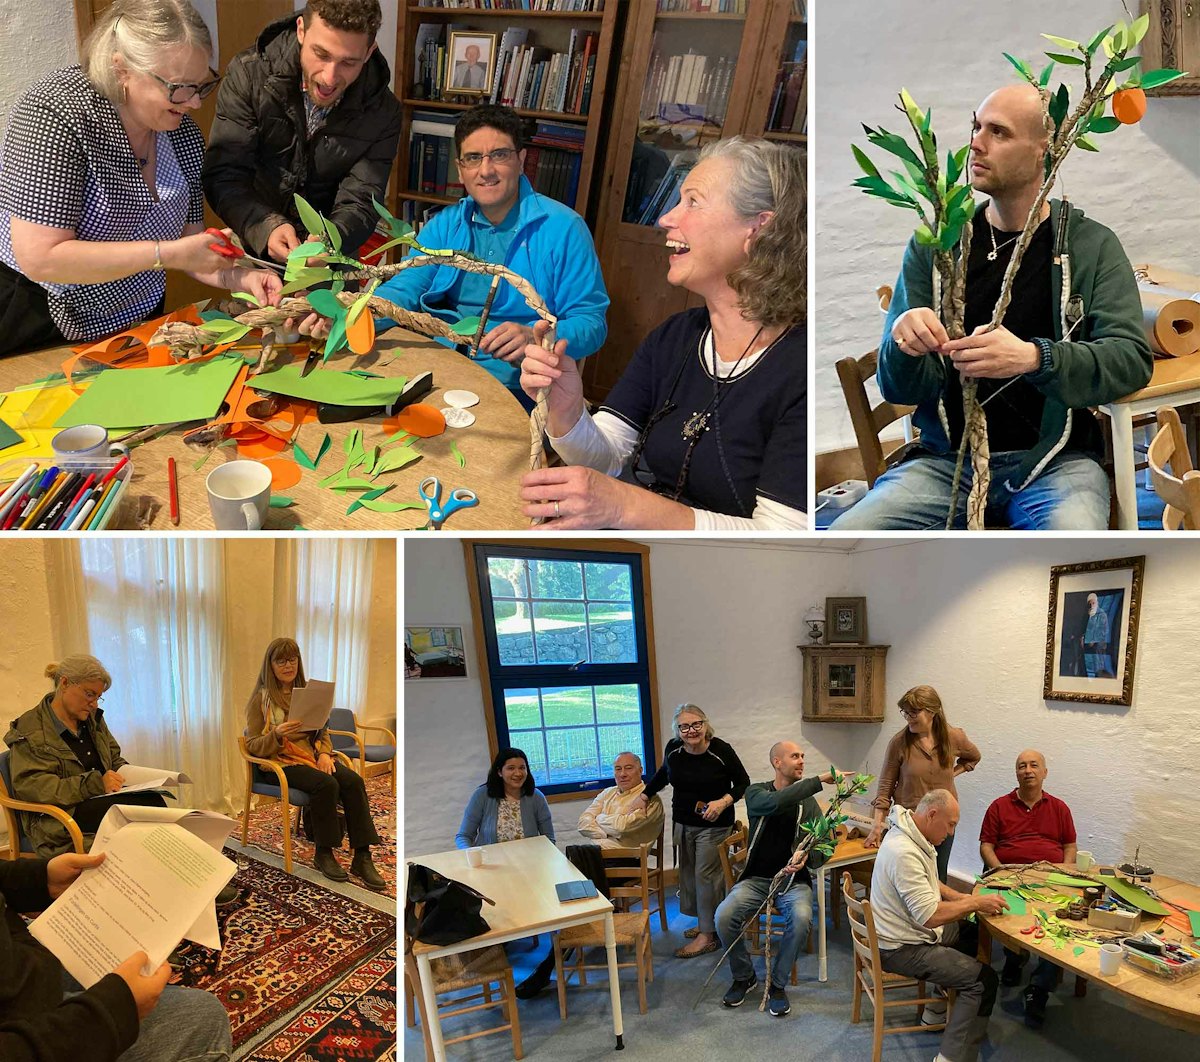 Participants of Bahá’í community-building activities in Stavanger, Norway, have been exploring different aspects of the life of ‘Abdu’l-Bahá through the arts. They are seen here making a paper tree for an upcoming play.